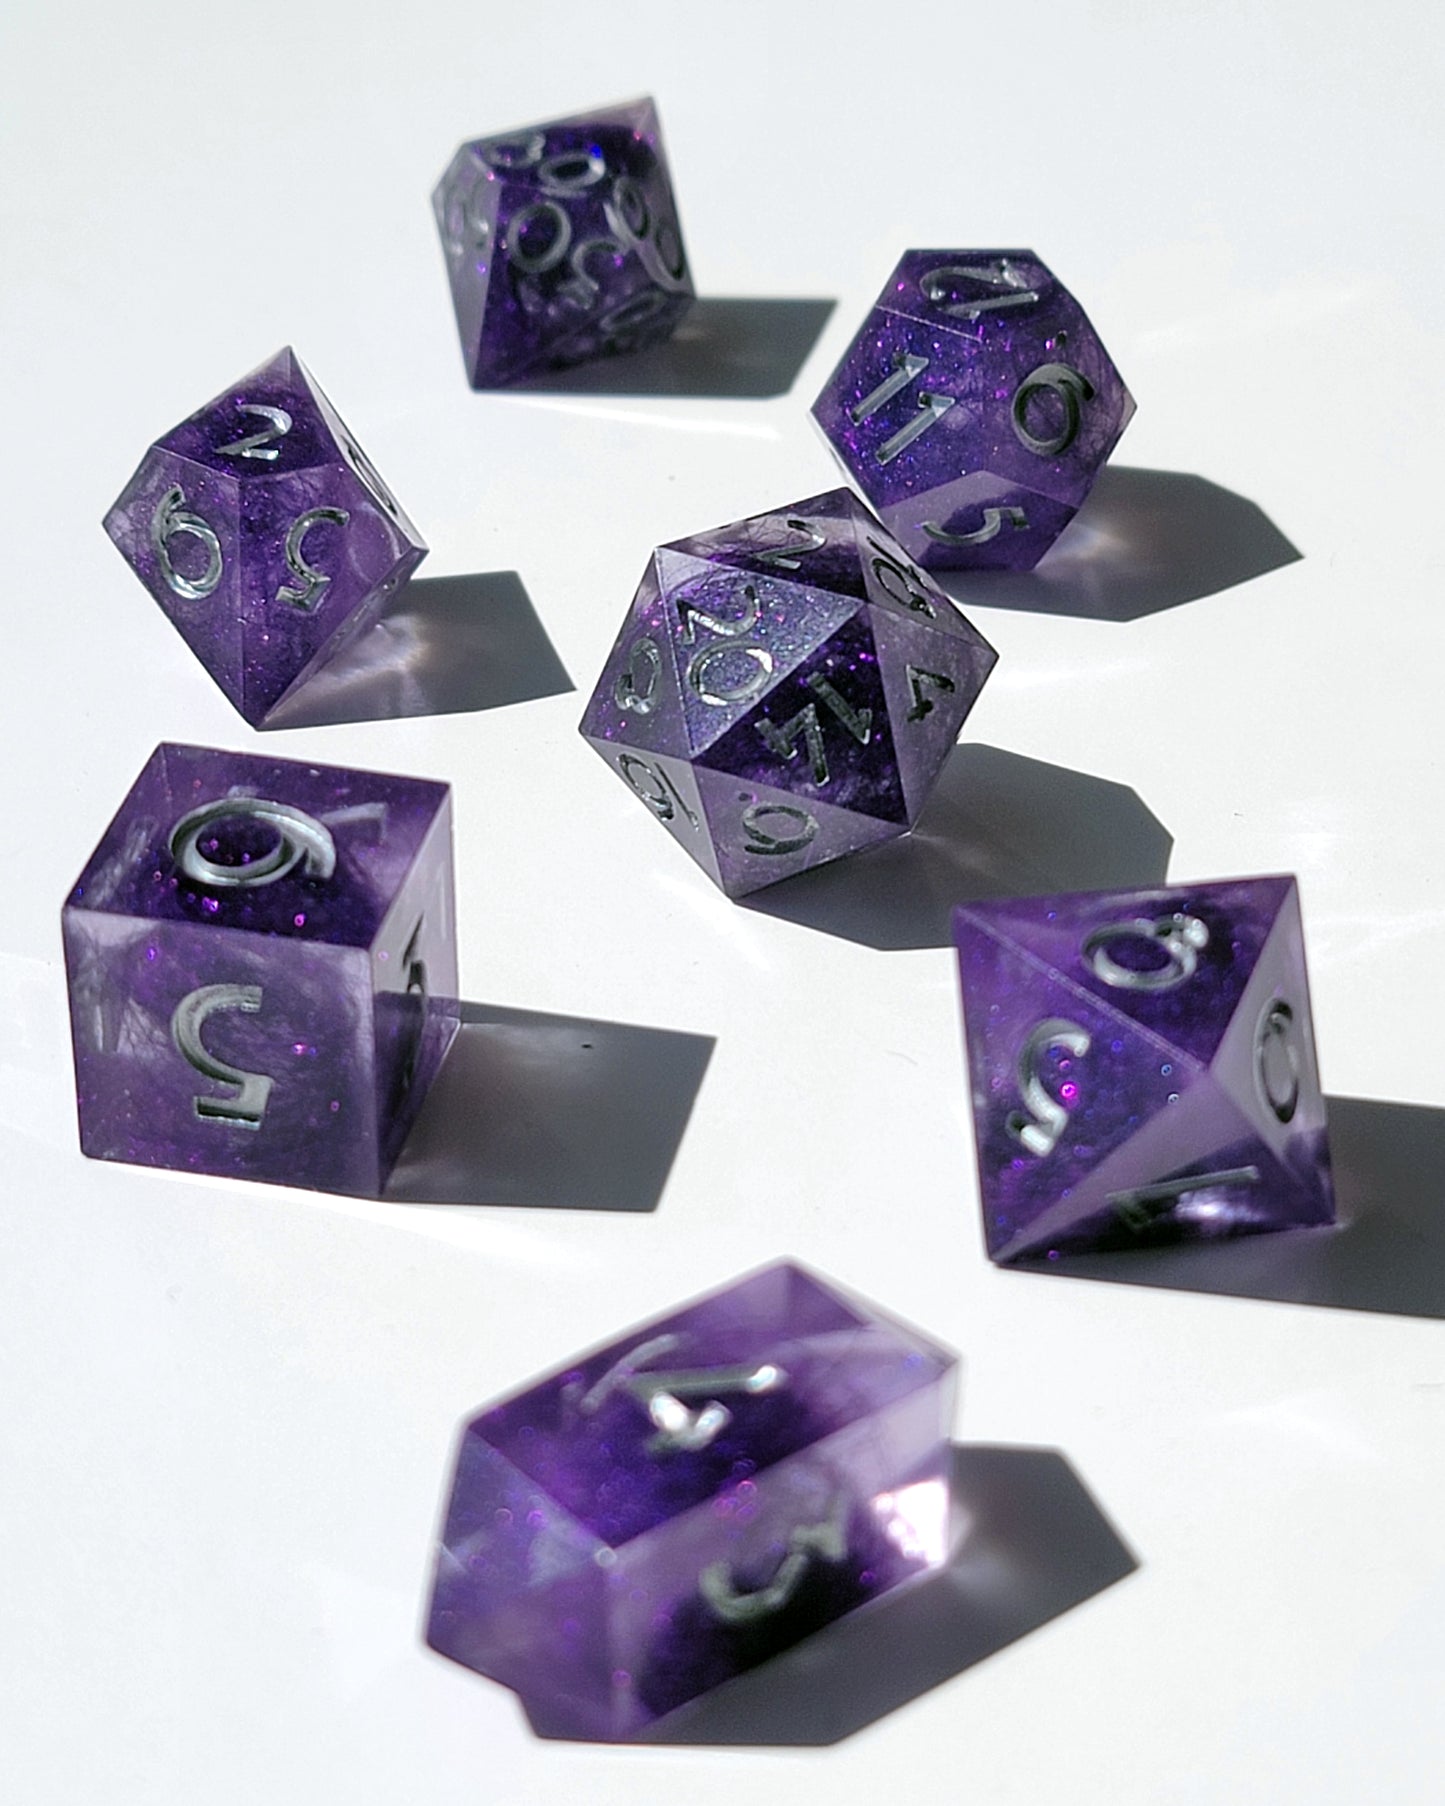 Dunamancy Strings- 7 Piece handmade D&D Dice| Hand Crafted Dungeons and Dragons Dice